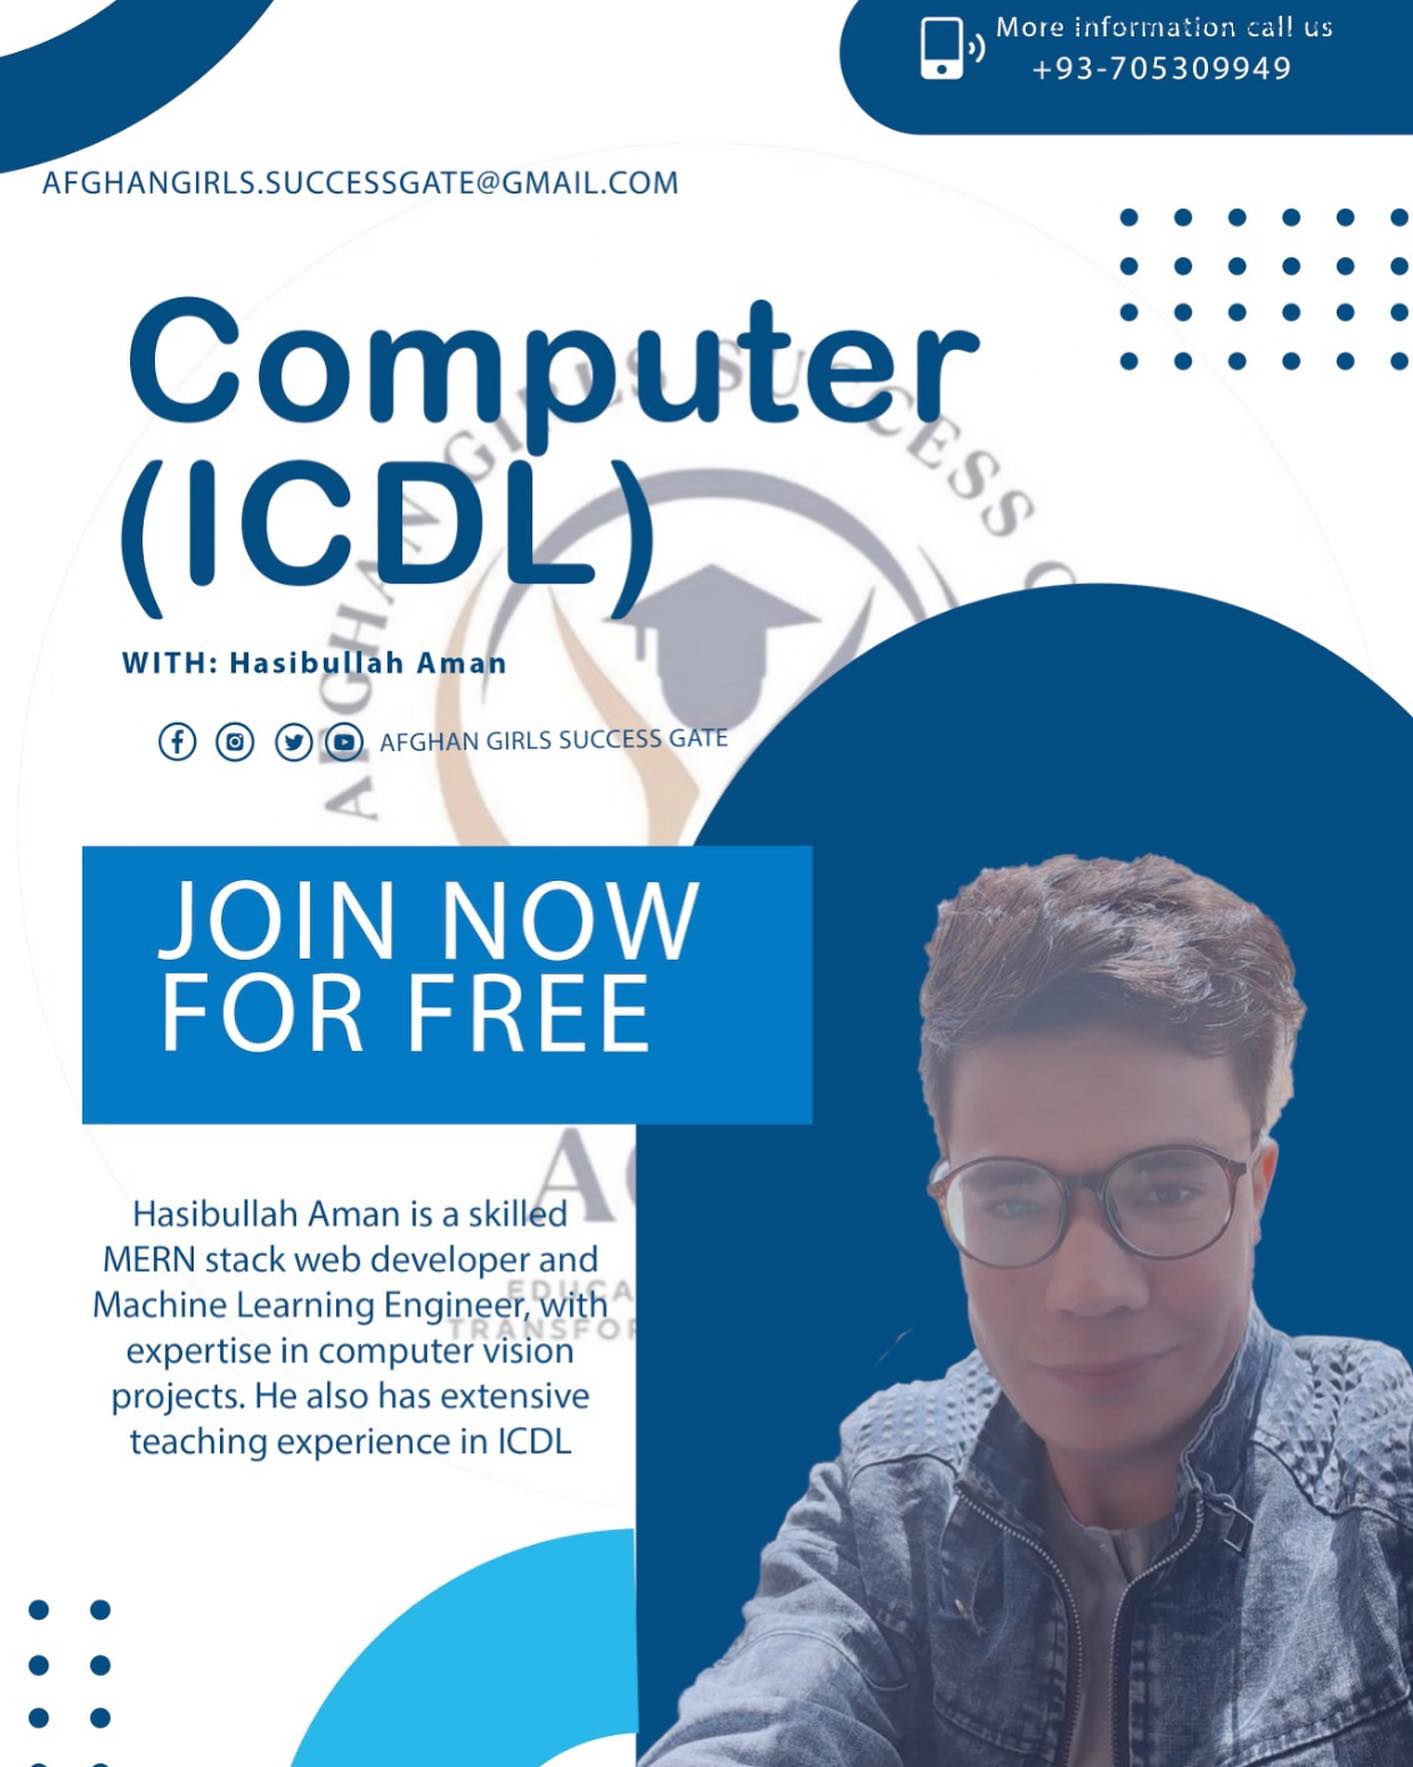 sharepic for computer ICDL course